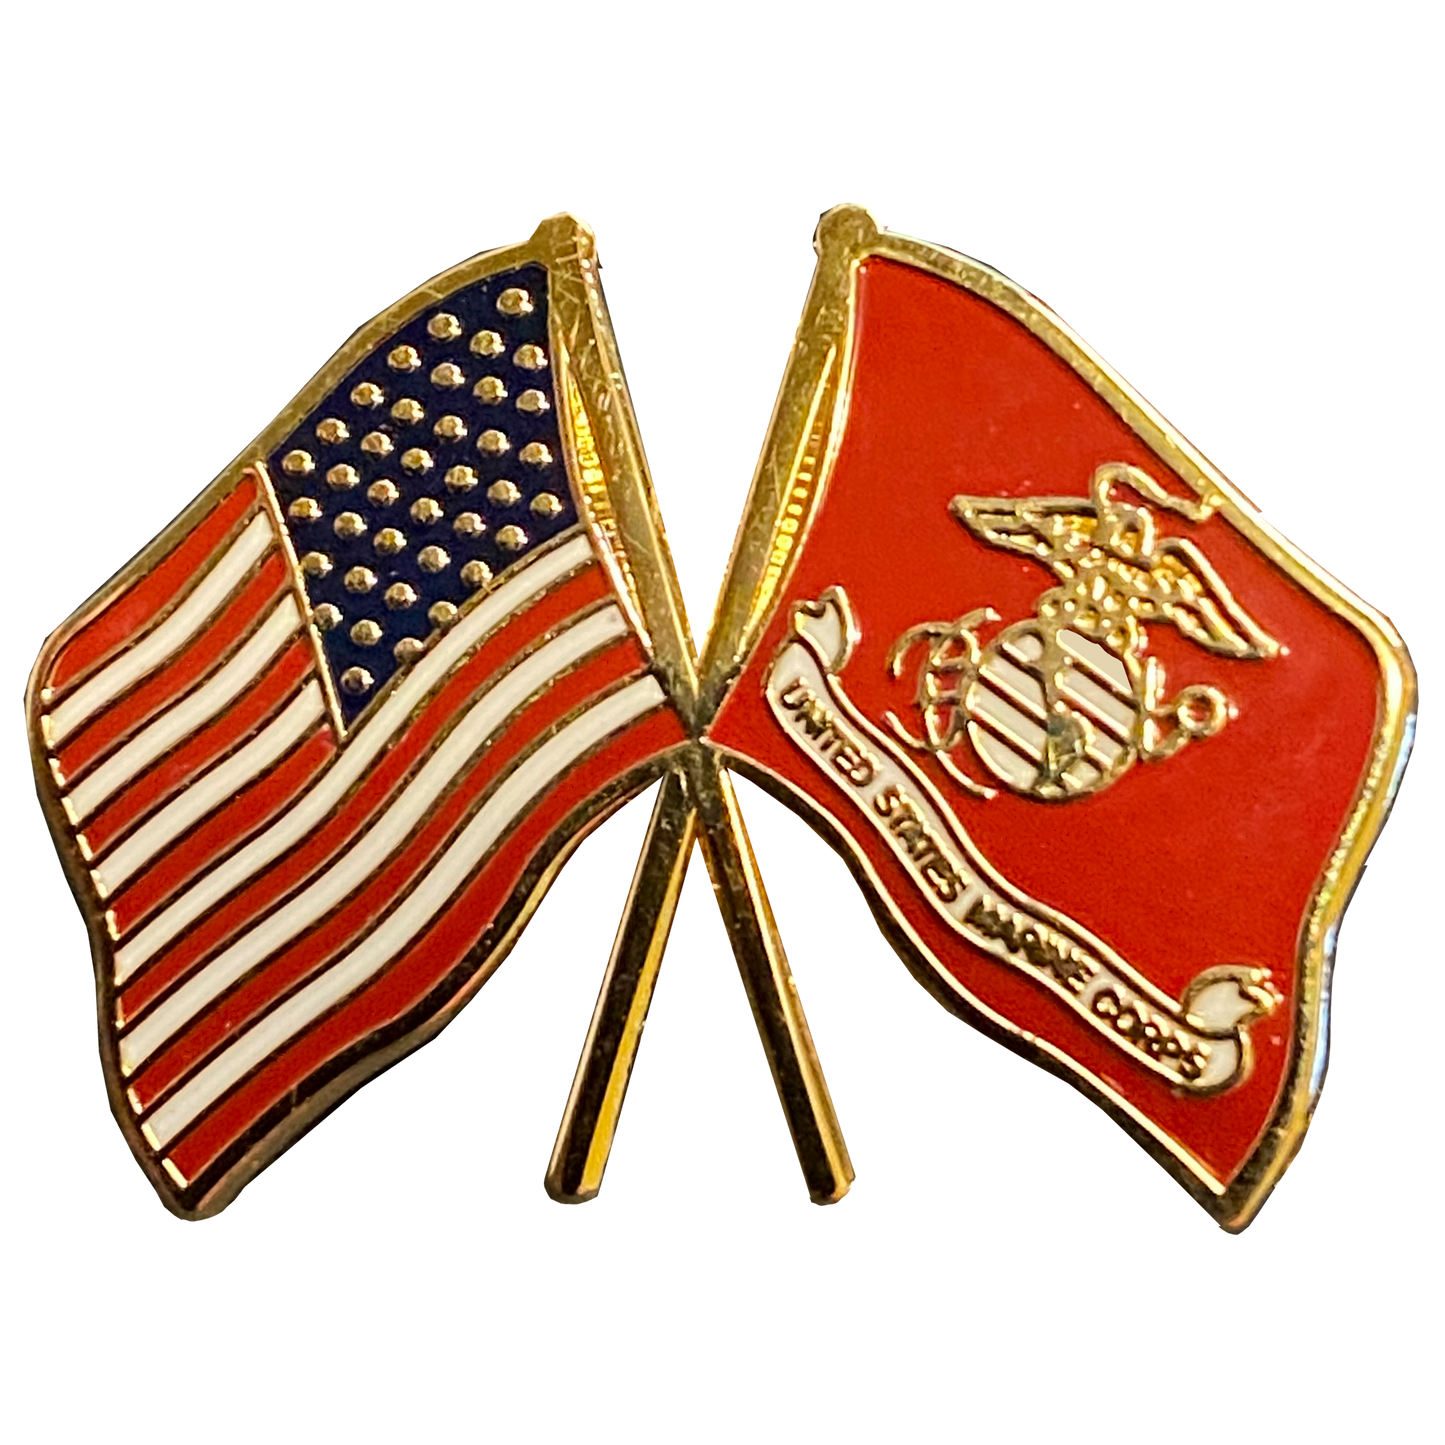 M-28 US MARINE CORPS and American Flag cloisonné lapel pin US Marines Crossed Flags